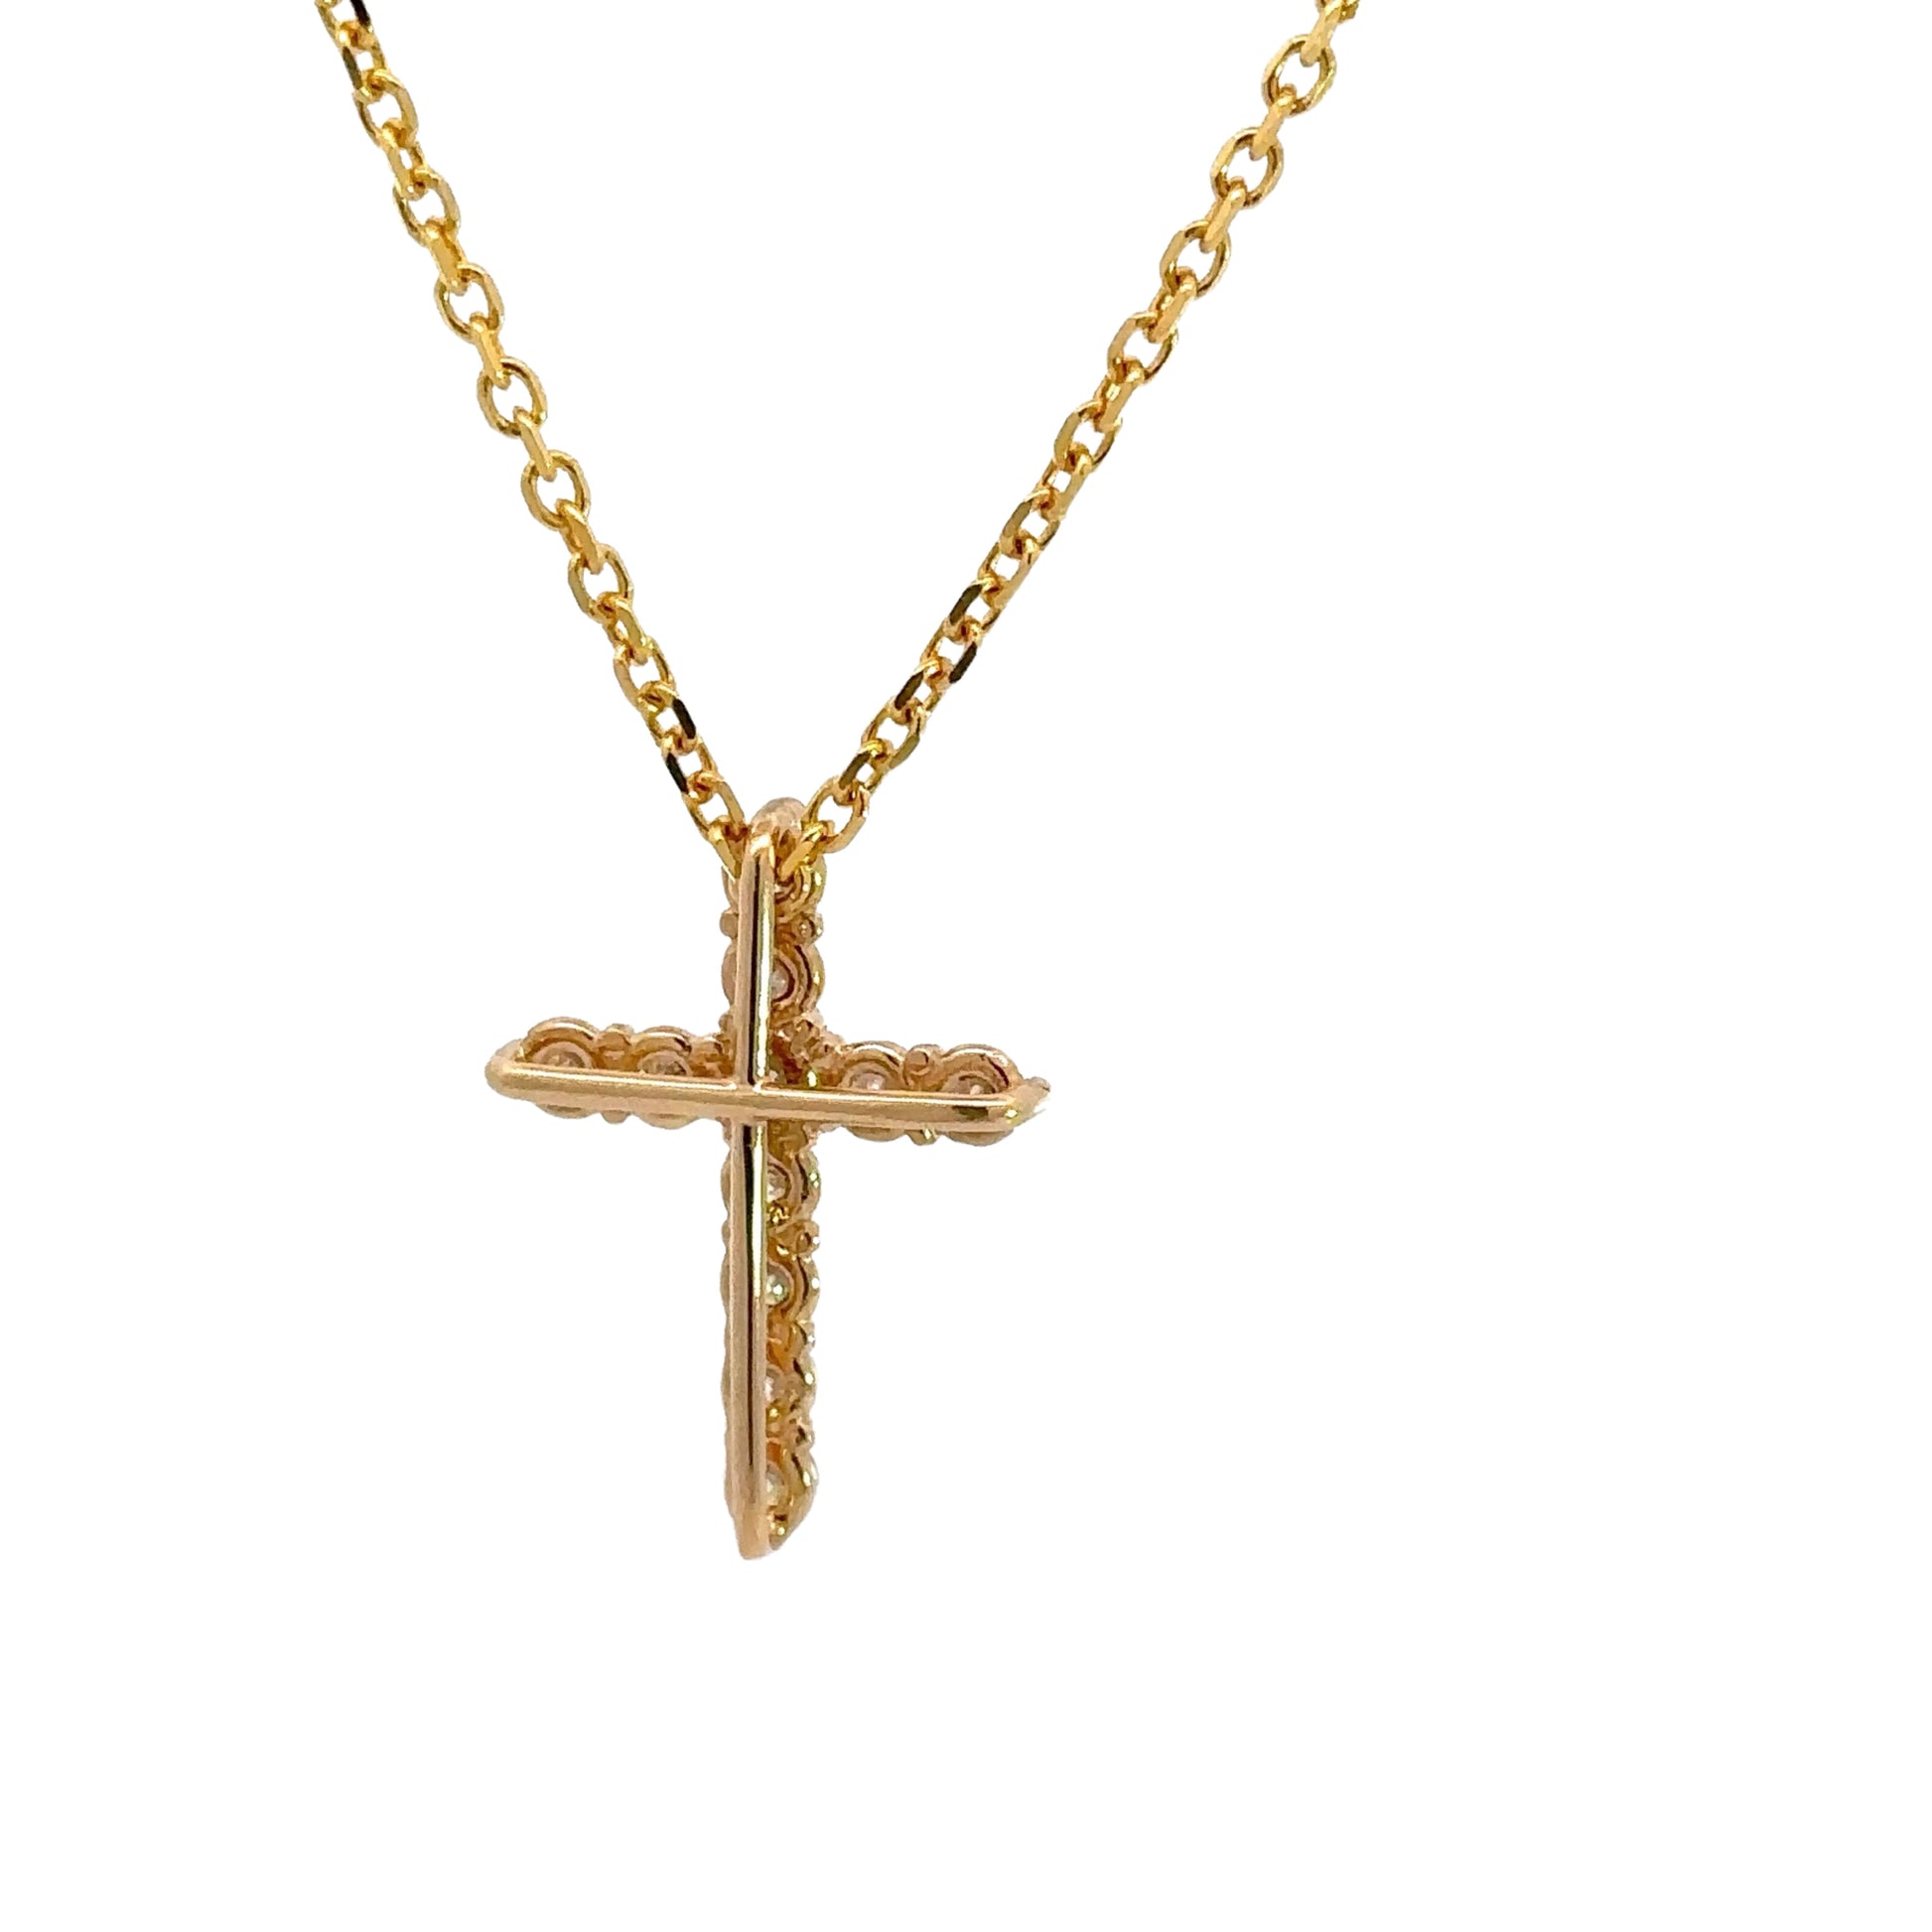 Back of cross with gold cross outline